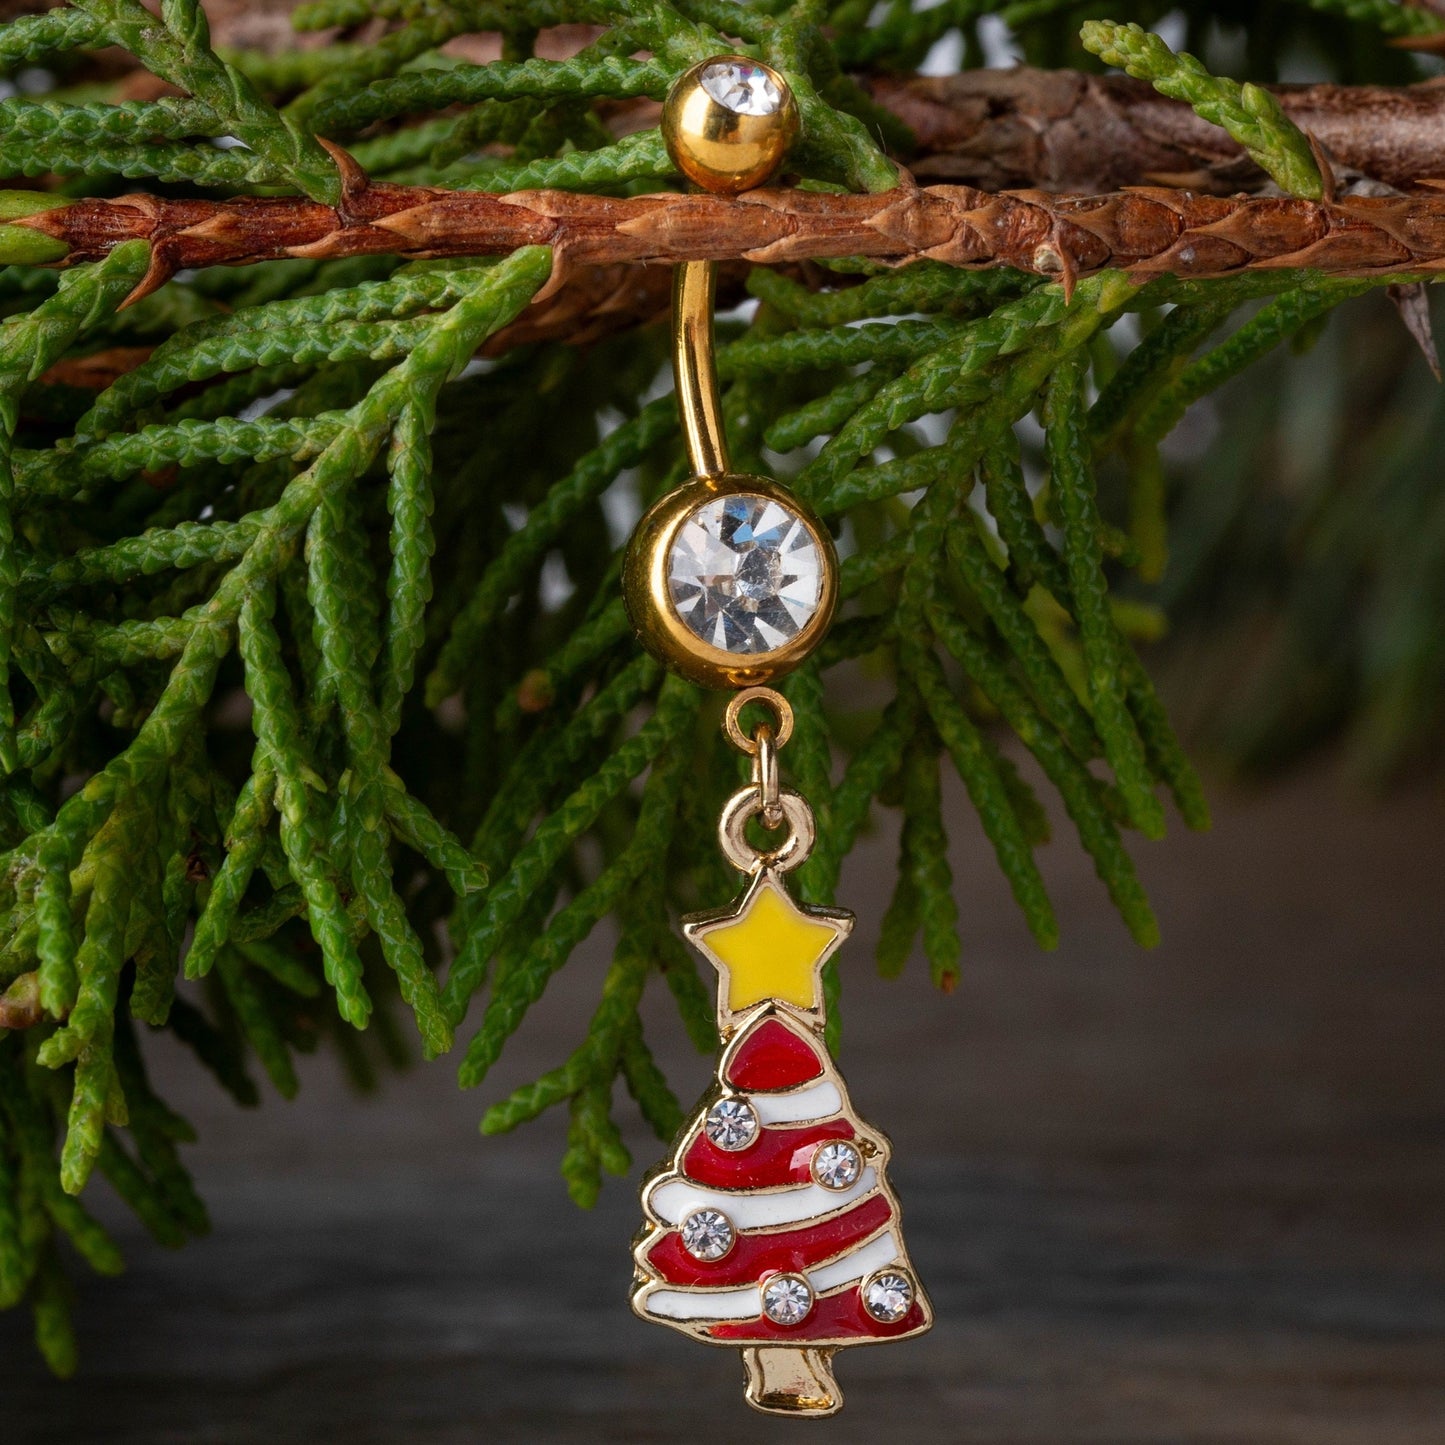 CZ Crystal Yellow Star Christmas Tree Dangling Belly Button Ring - Gold Plated 316L Stainless Steel